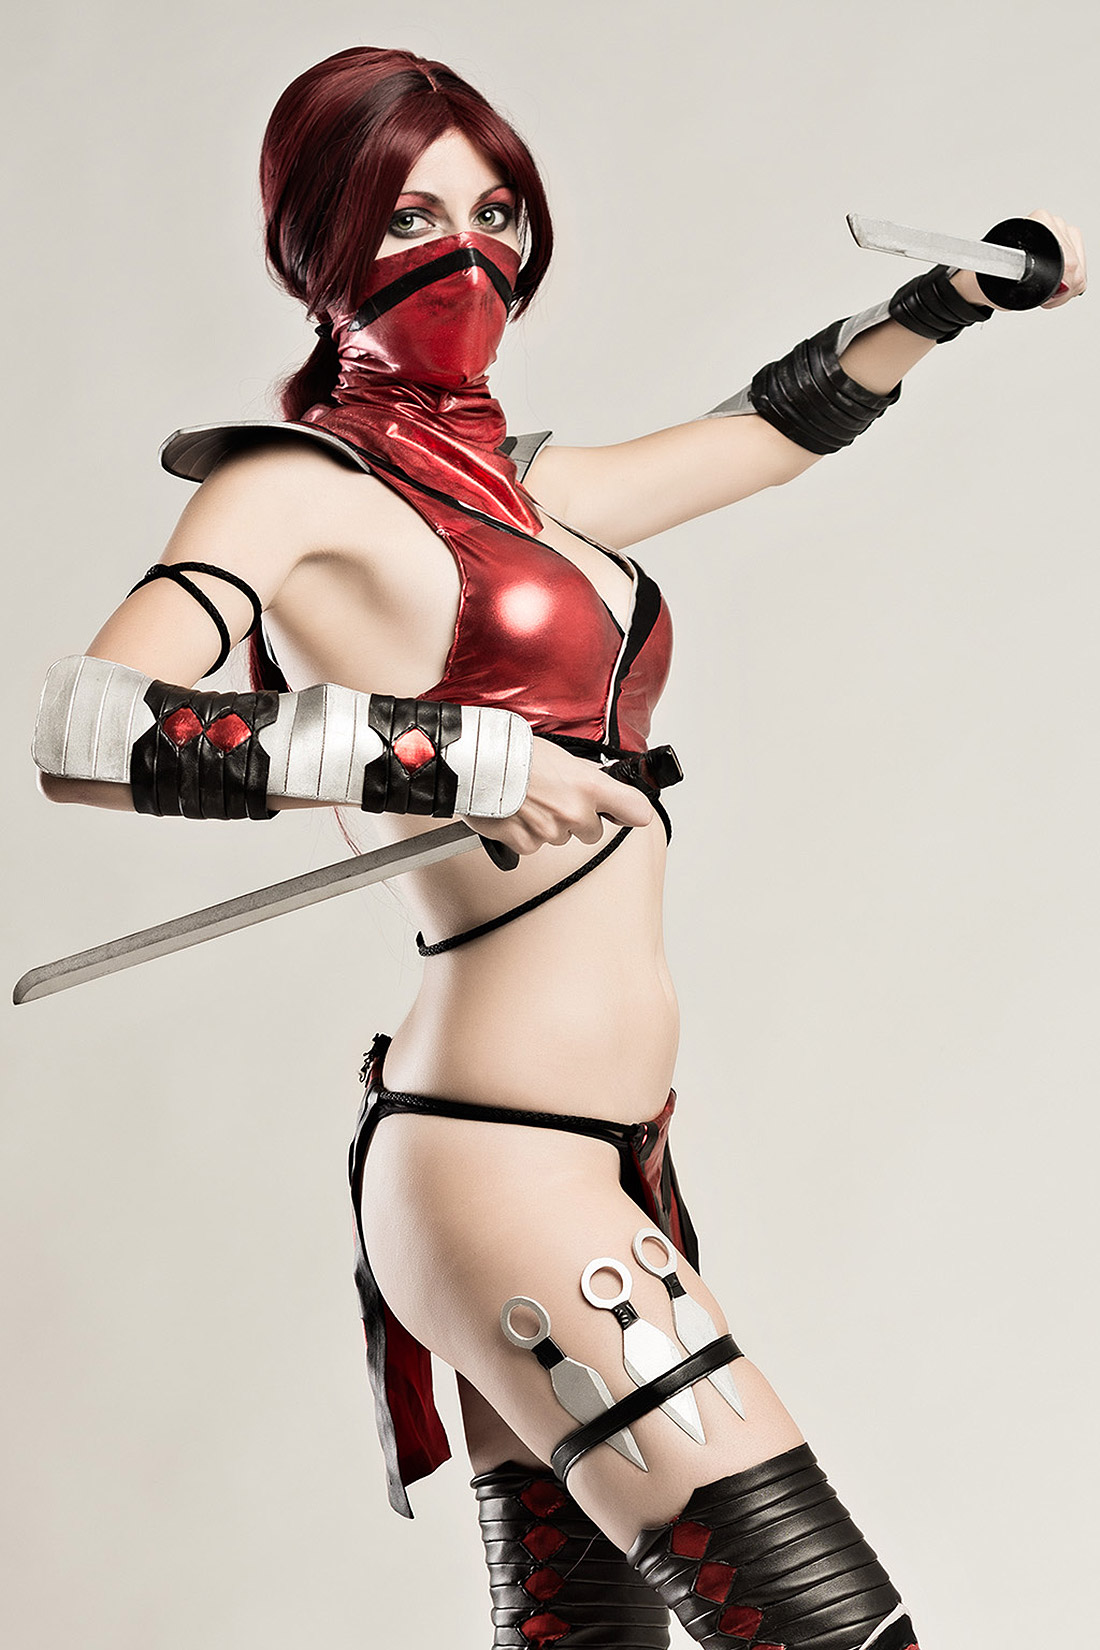 Skarlet is a very ferocious opponent composed solely of blood